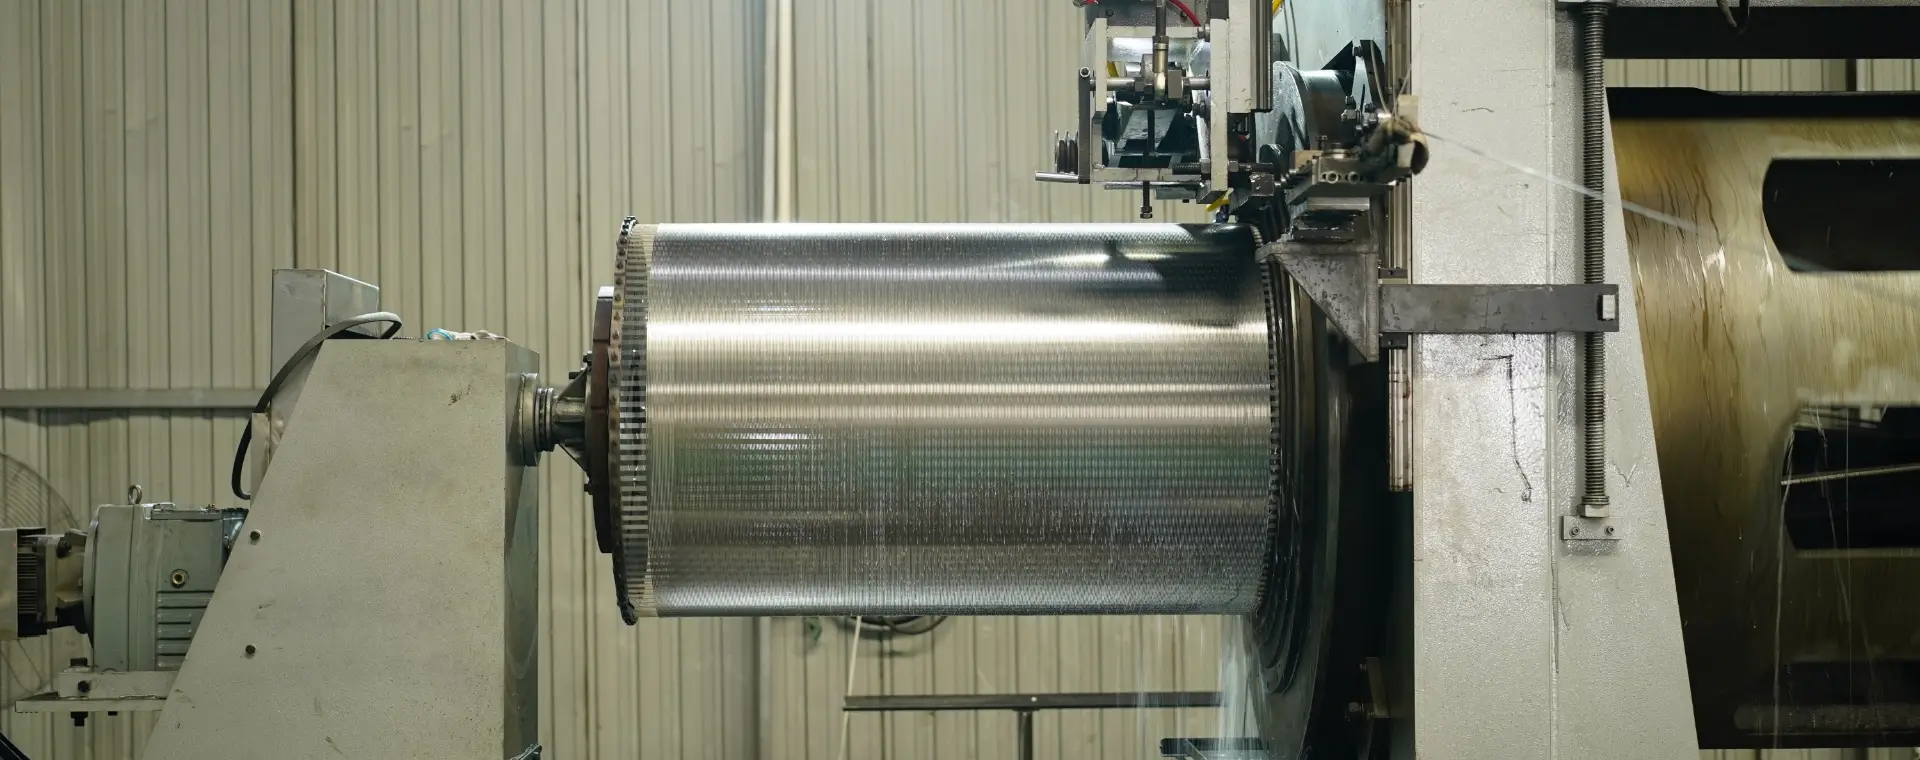 An equipment is producing wedge wire screen cylinders.